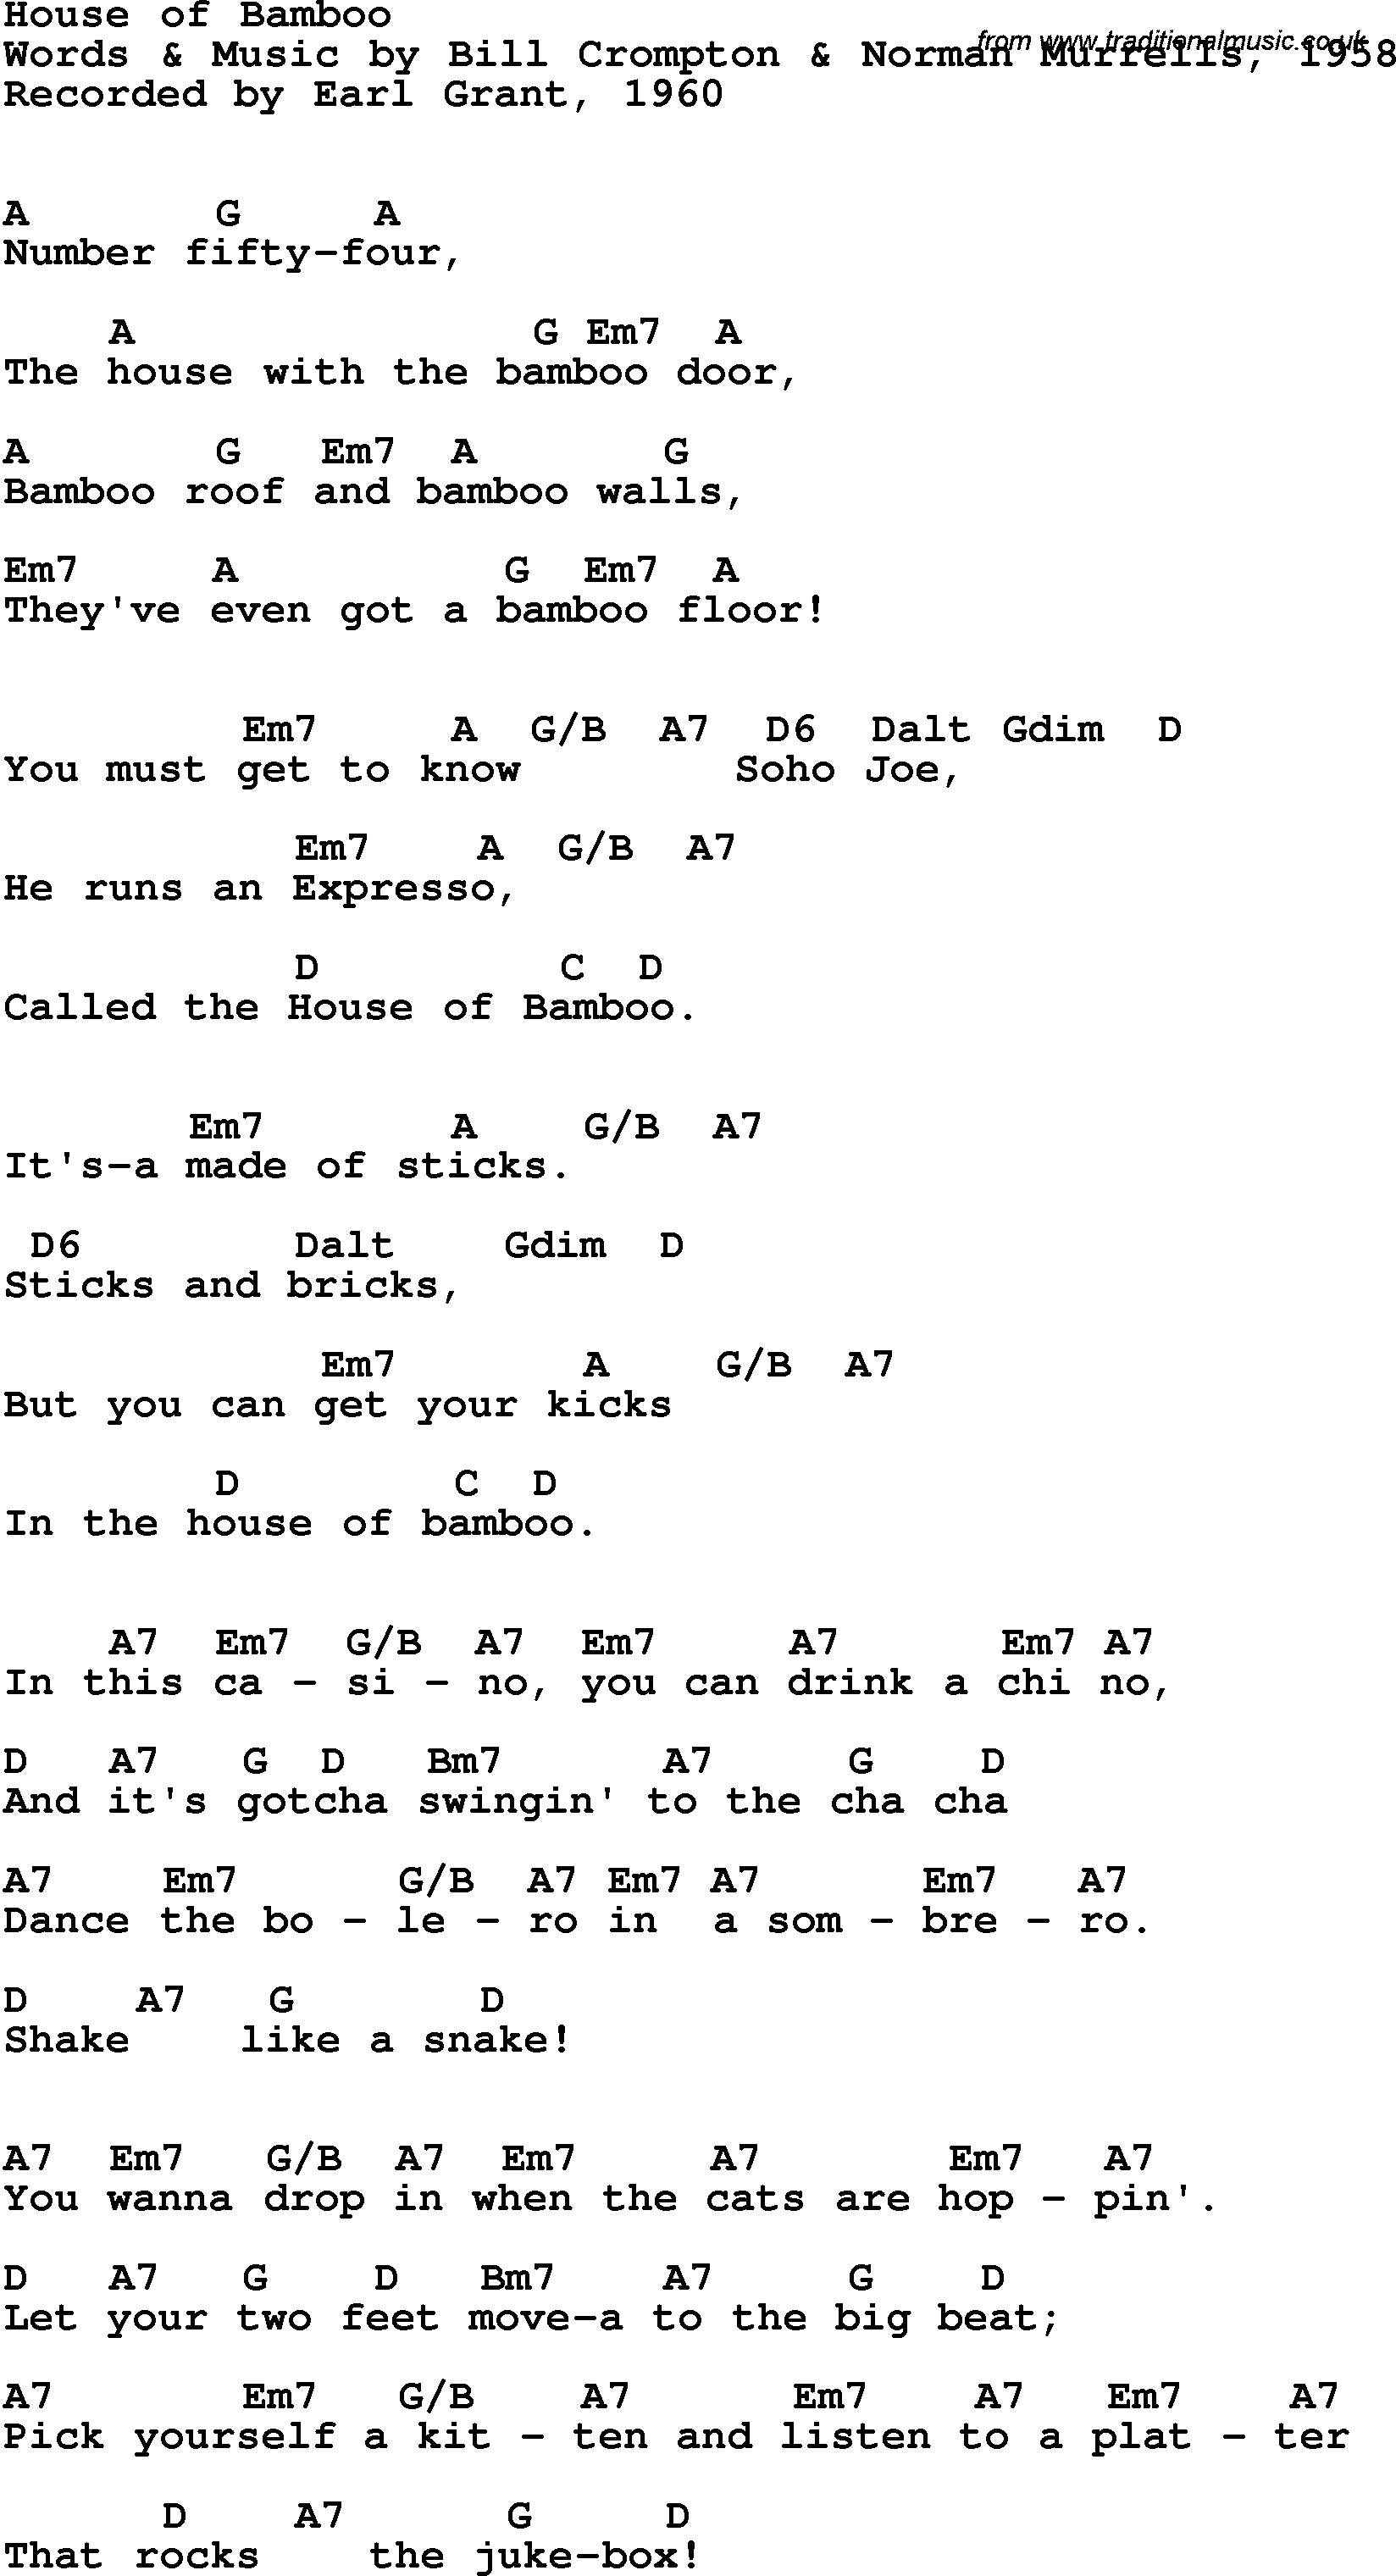 Song Lyrics with guitar chords for House Of Bamboo - Earl Grant, 1960